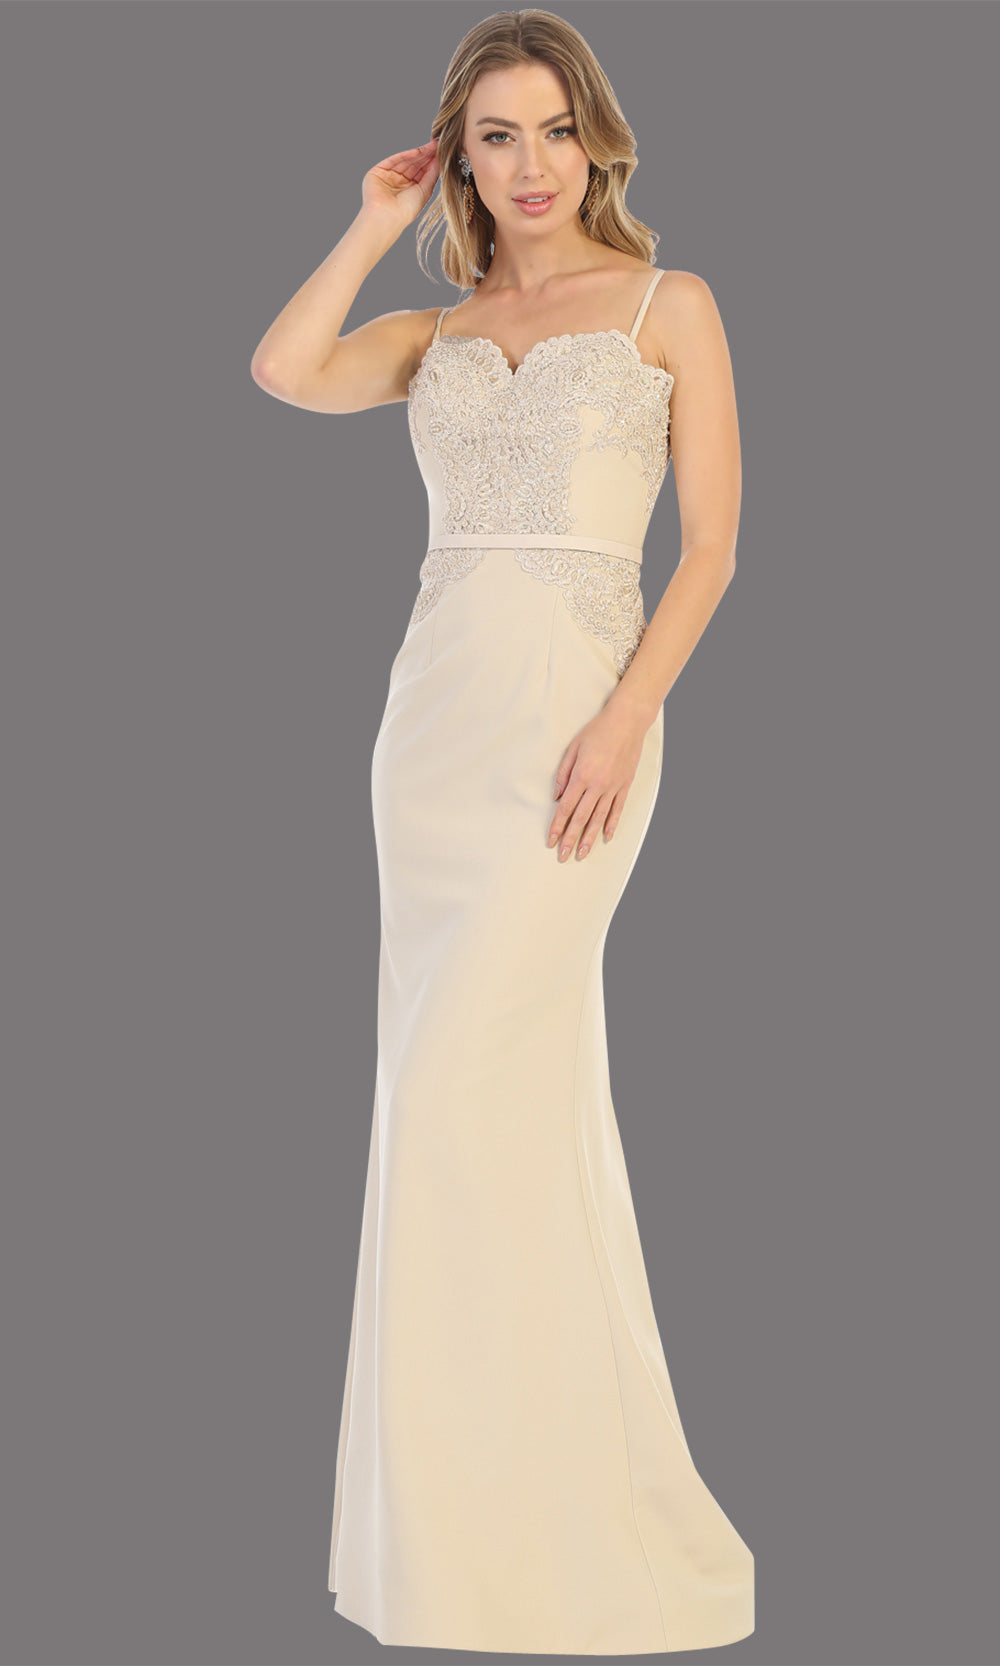 Mayqueen MQ1759 long champagne lace top evening fitted dress w/straps. Full length light gold gown is perfect for bridesmaids, enagagement/e-shoot dress, wedding guest dress, indowestern gown, formal evening party dress, prom. Plus sizes avail